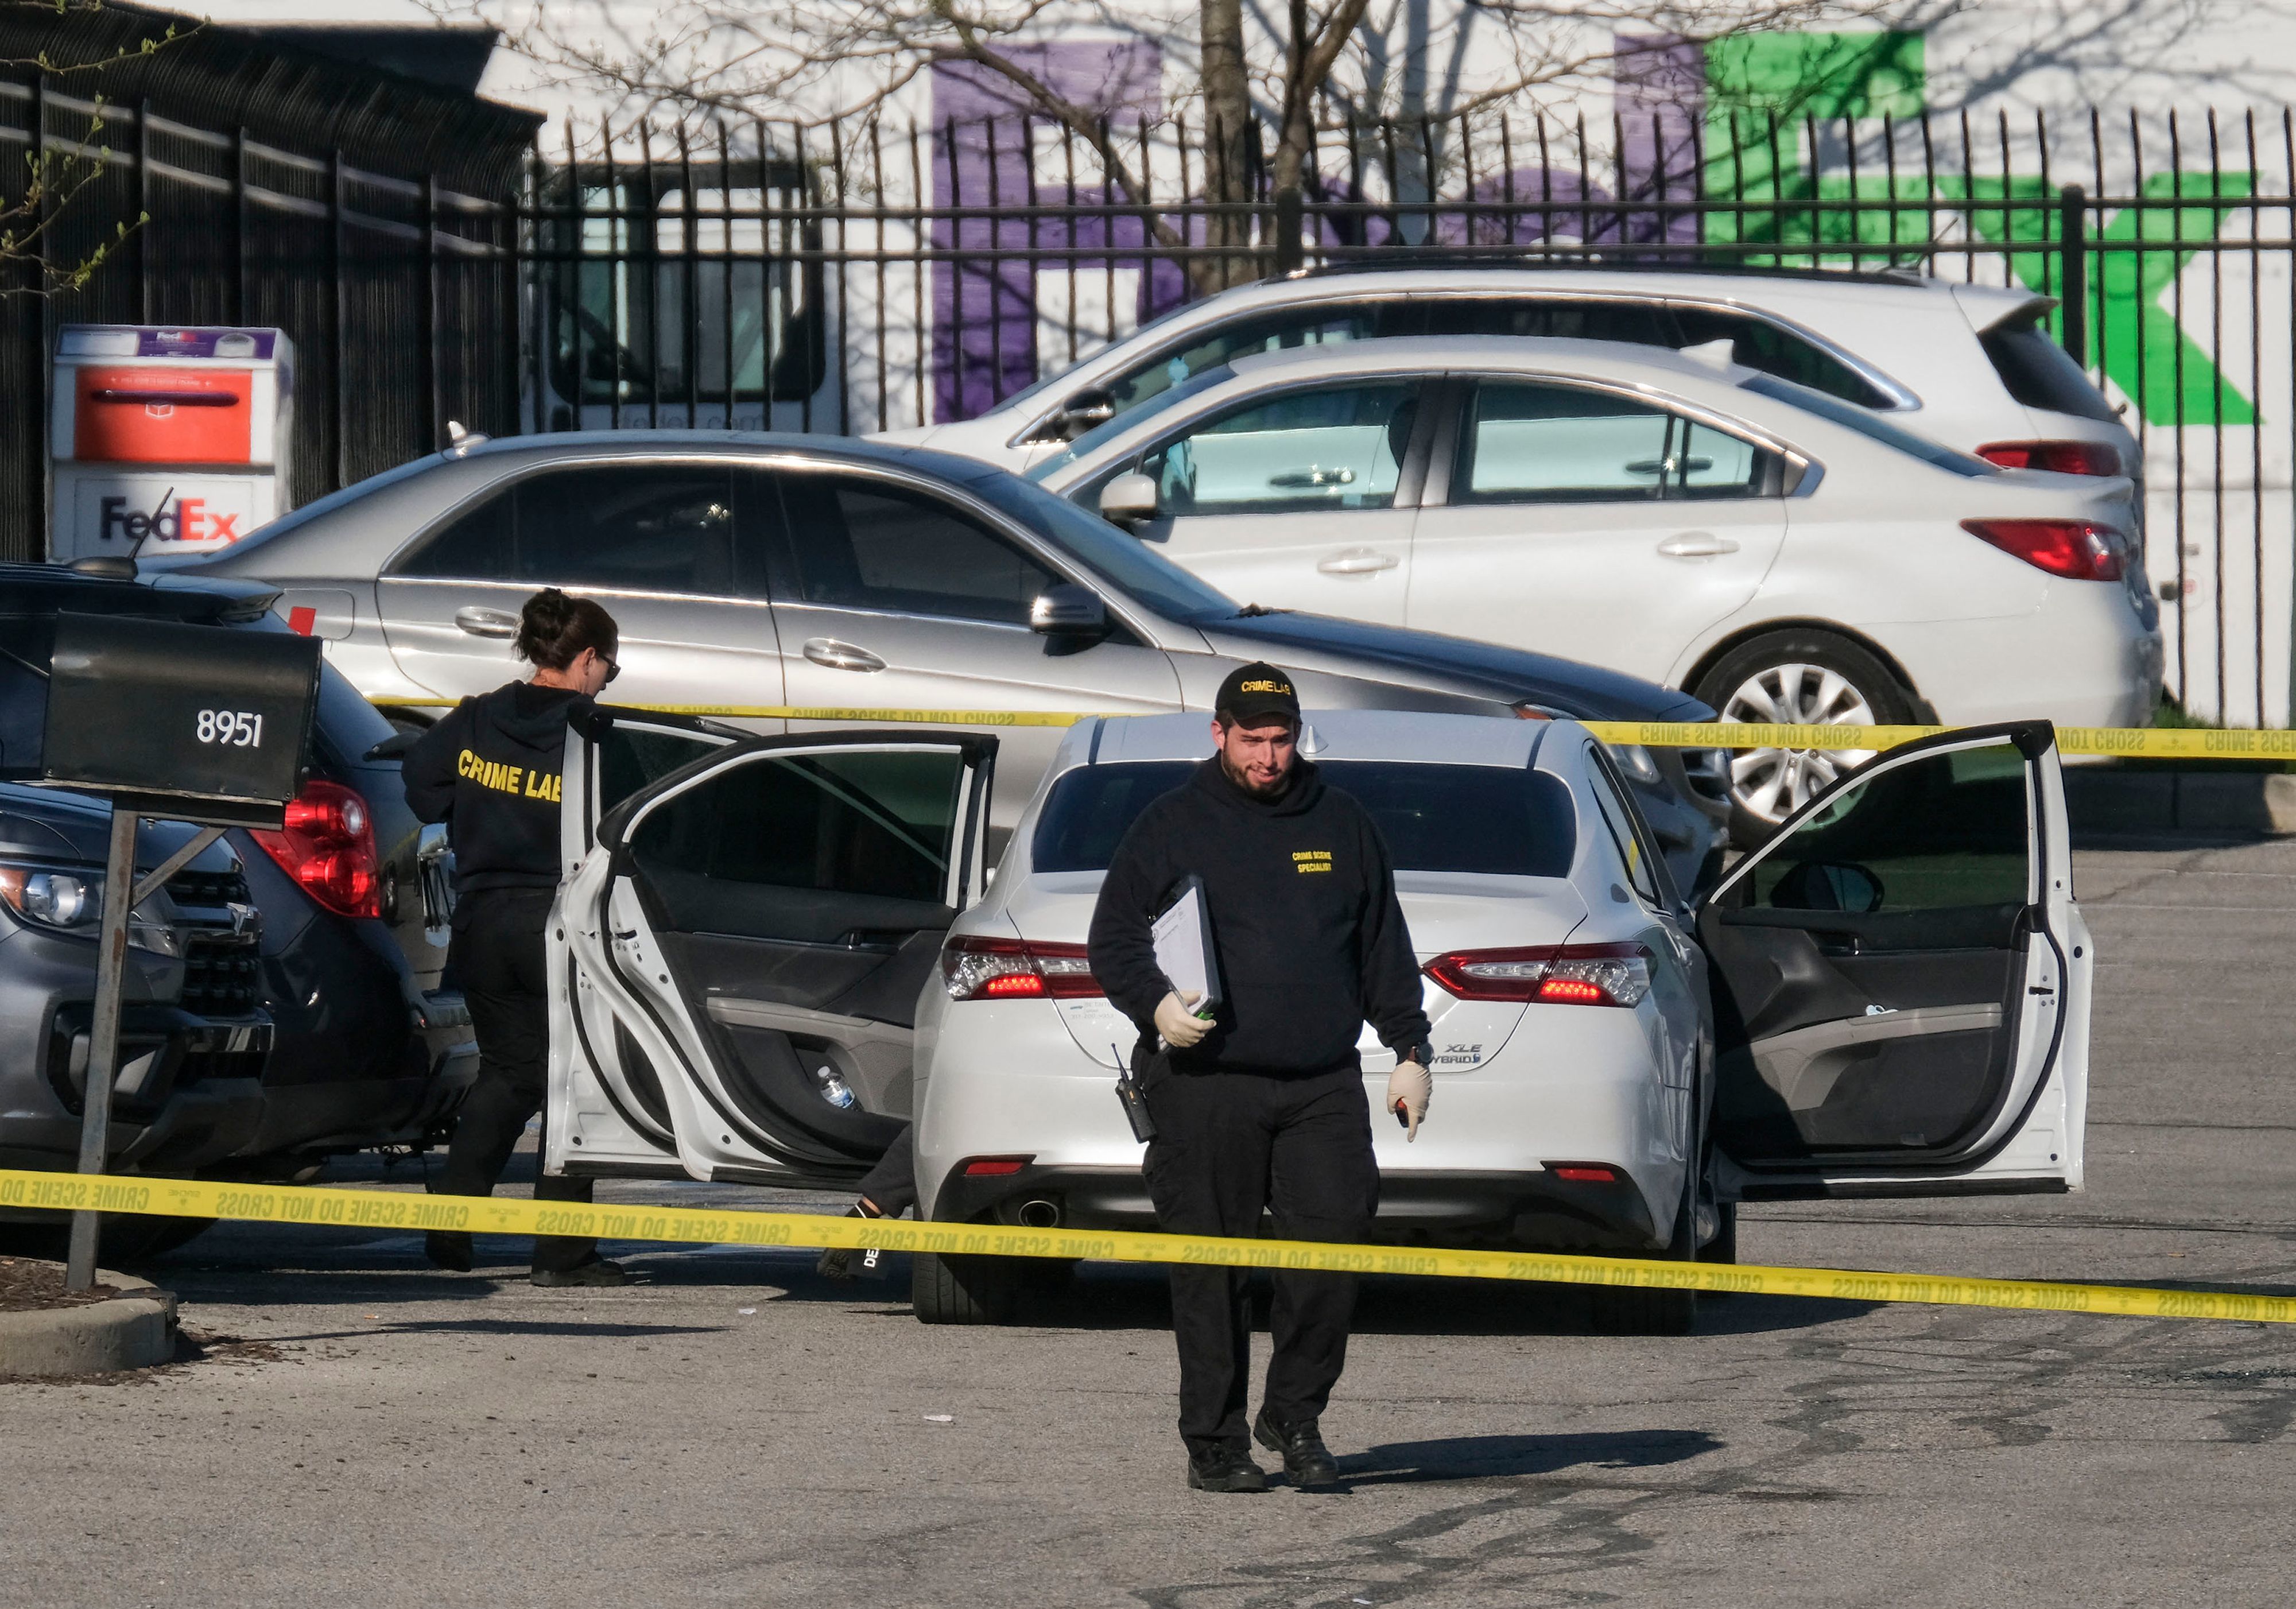 Crime scene investigators walk through the parking lot of a FedEx facility in Indianapolis on Friday. A gunman killed at least eight people and injured several others. CREDIT: Jeff Dean/AFP via Getty Images